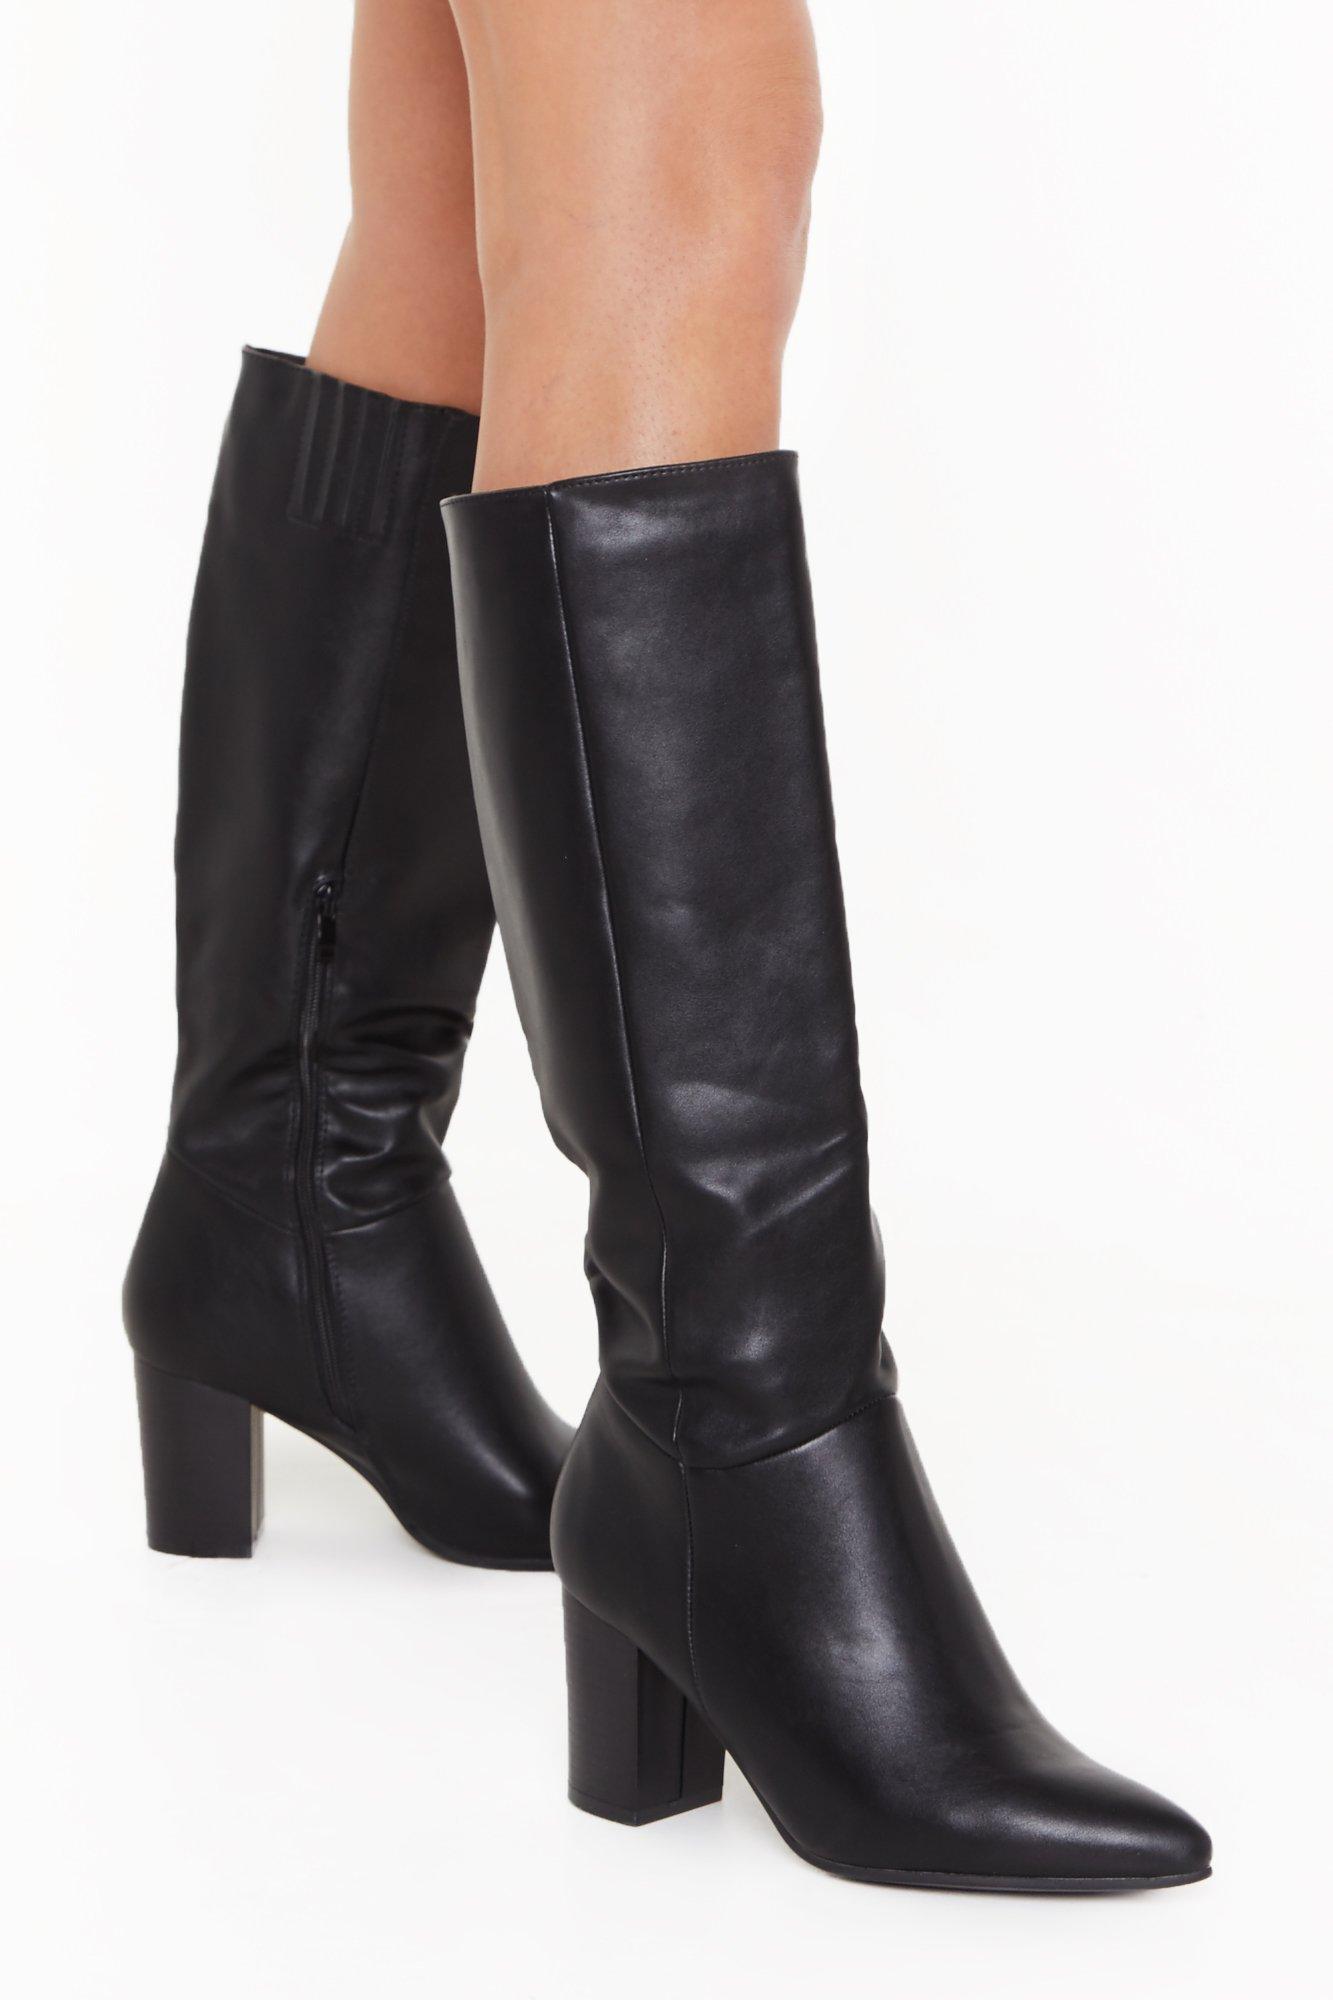 Stay Groovy Heeled Knee-High Boots 